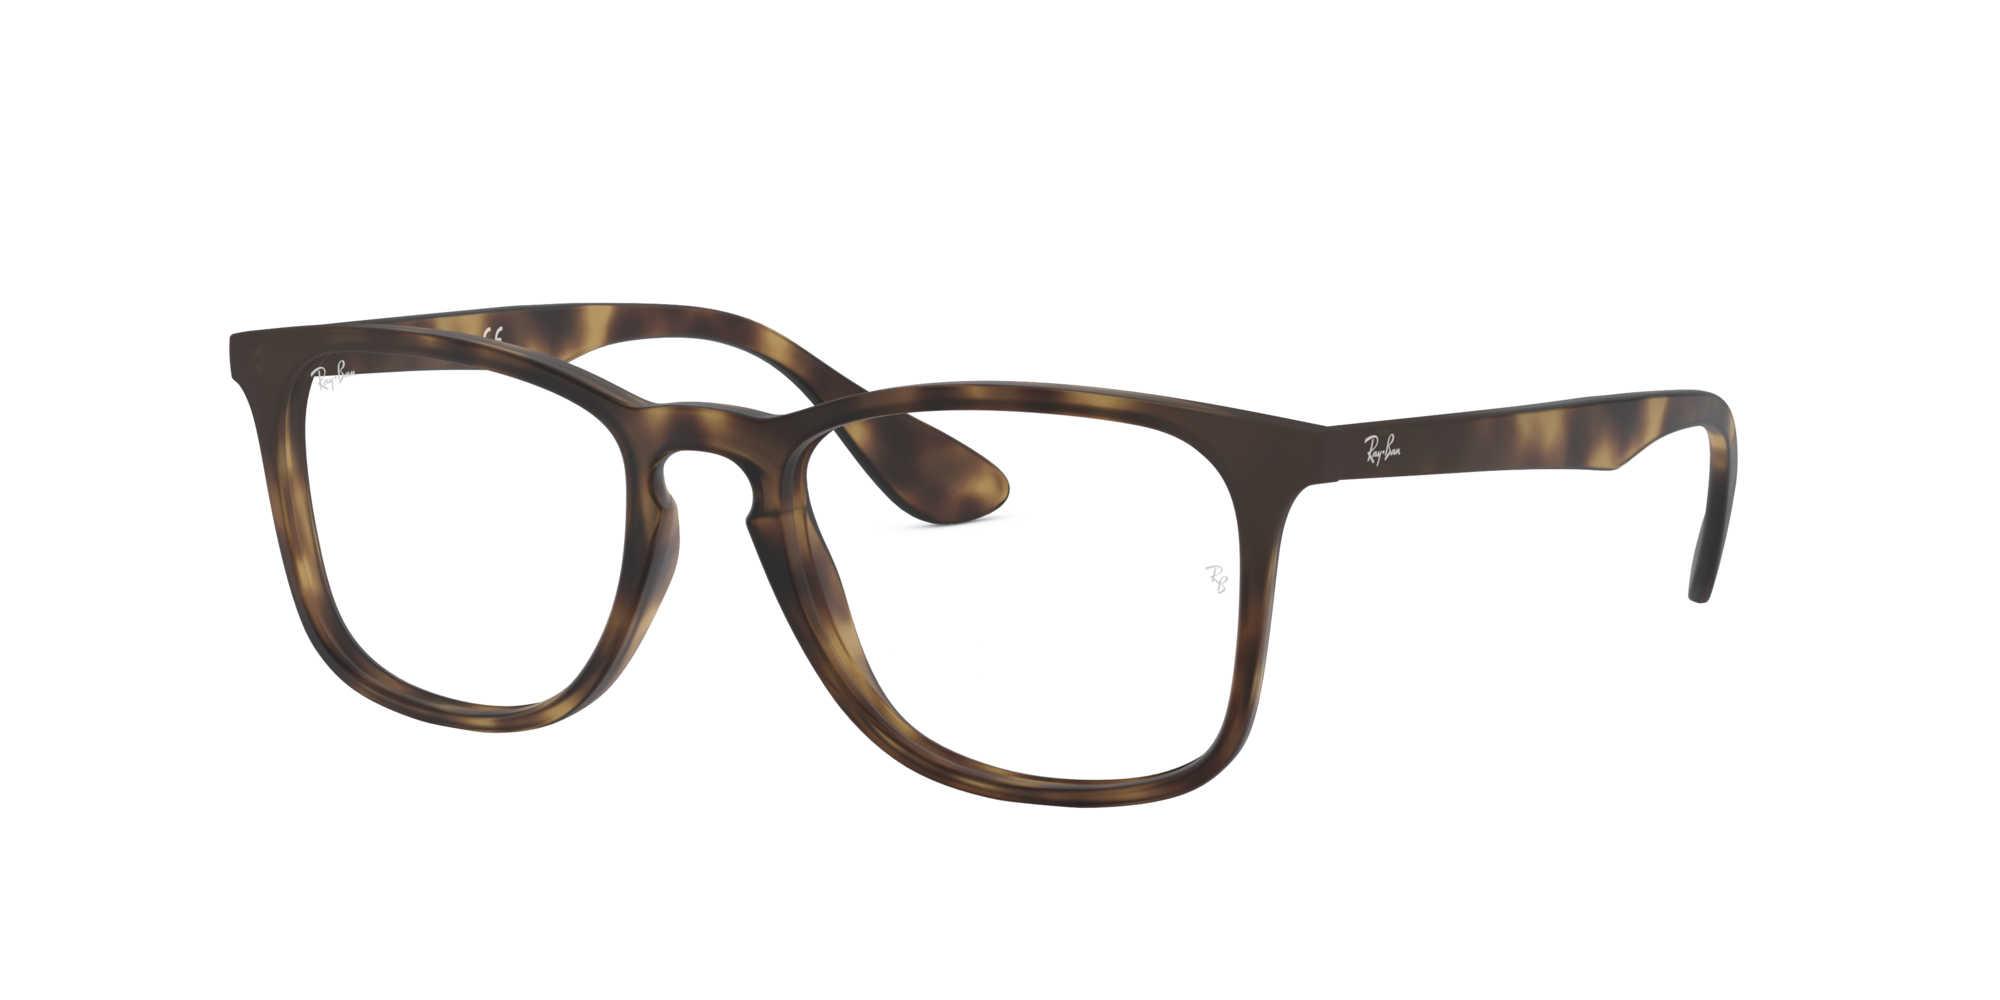 Angle_Left01 Ray-Ban RX 7074 (5365) Glasses Transparent / Tortoise Shell